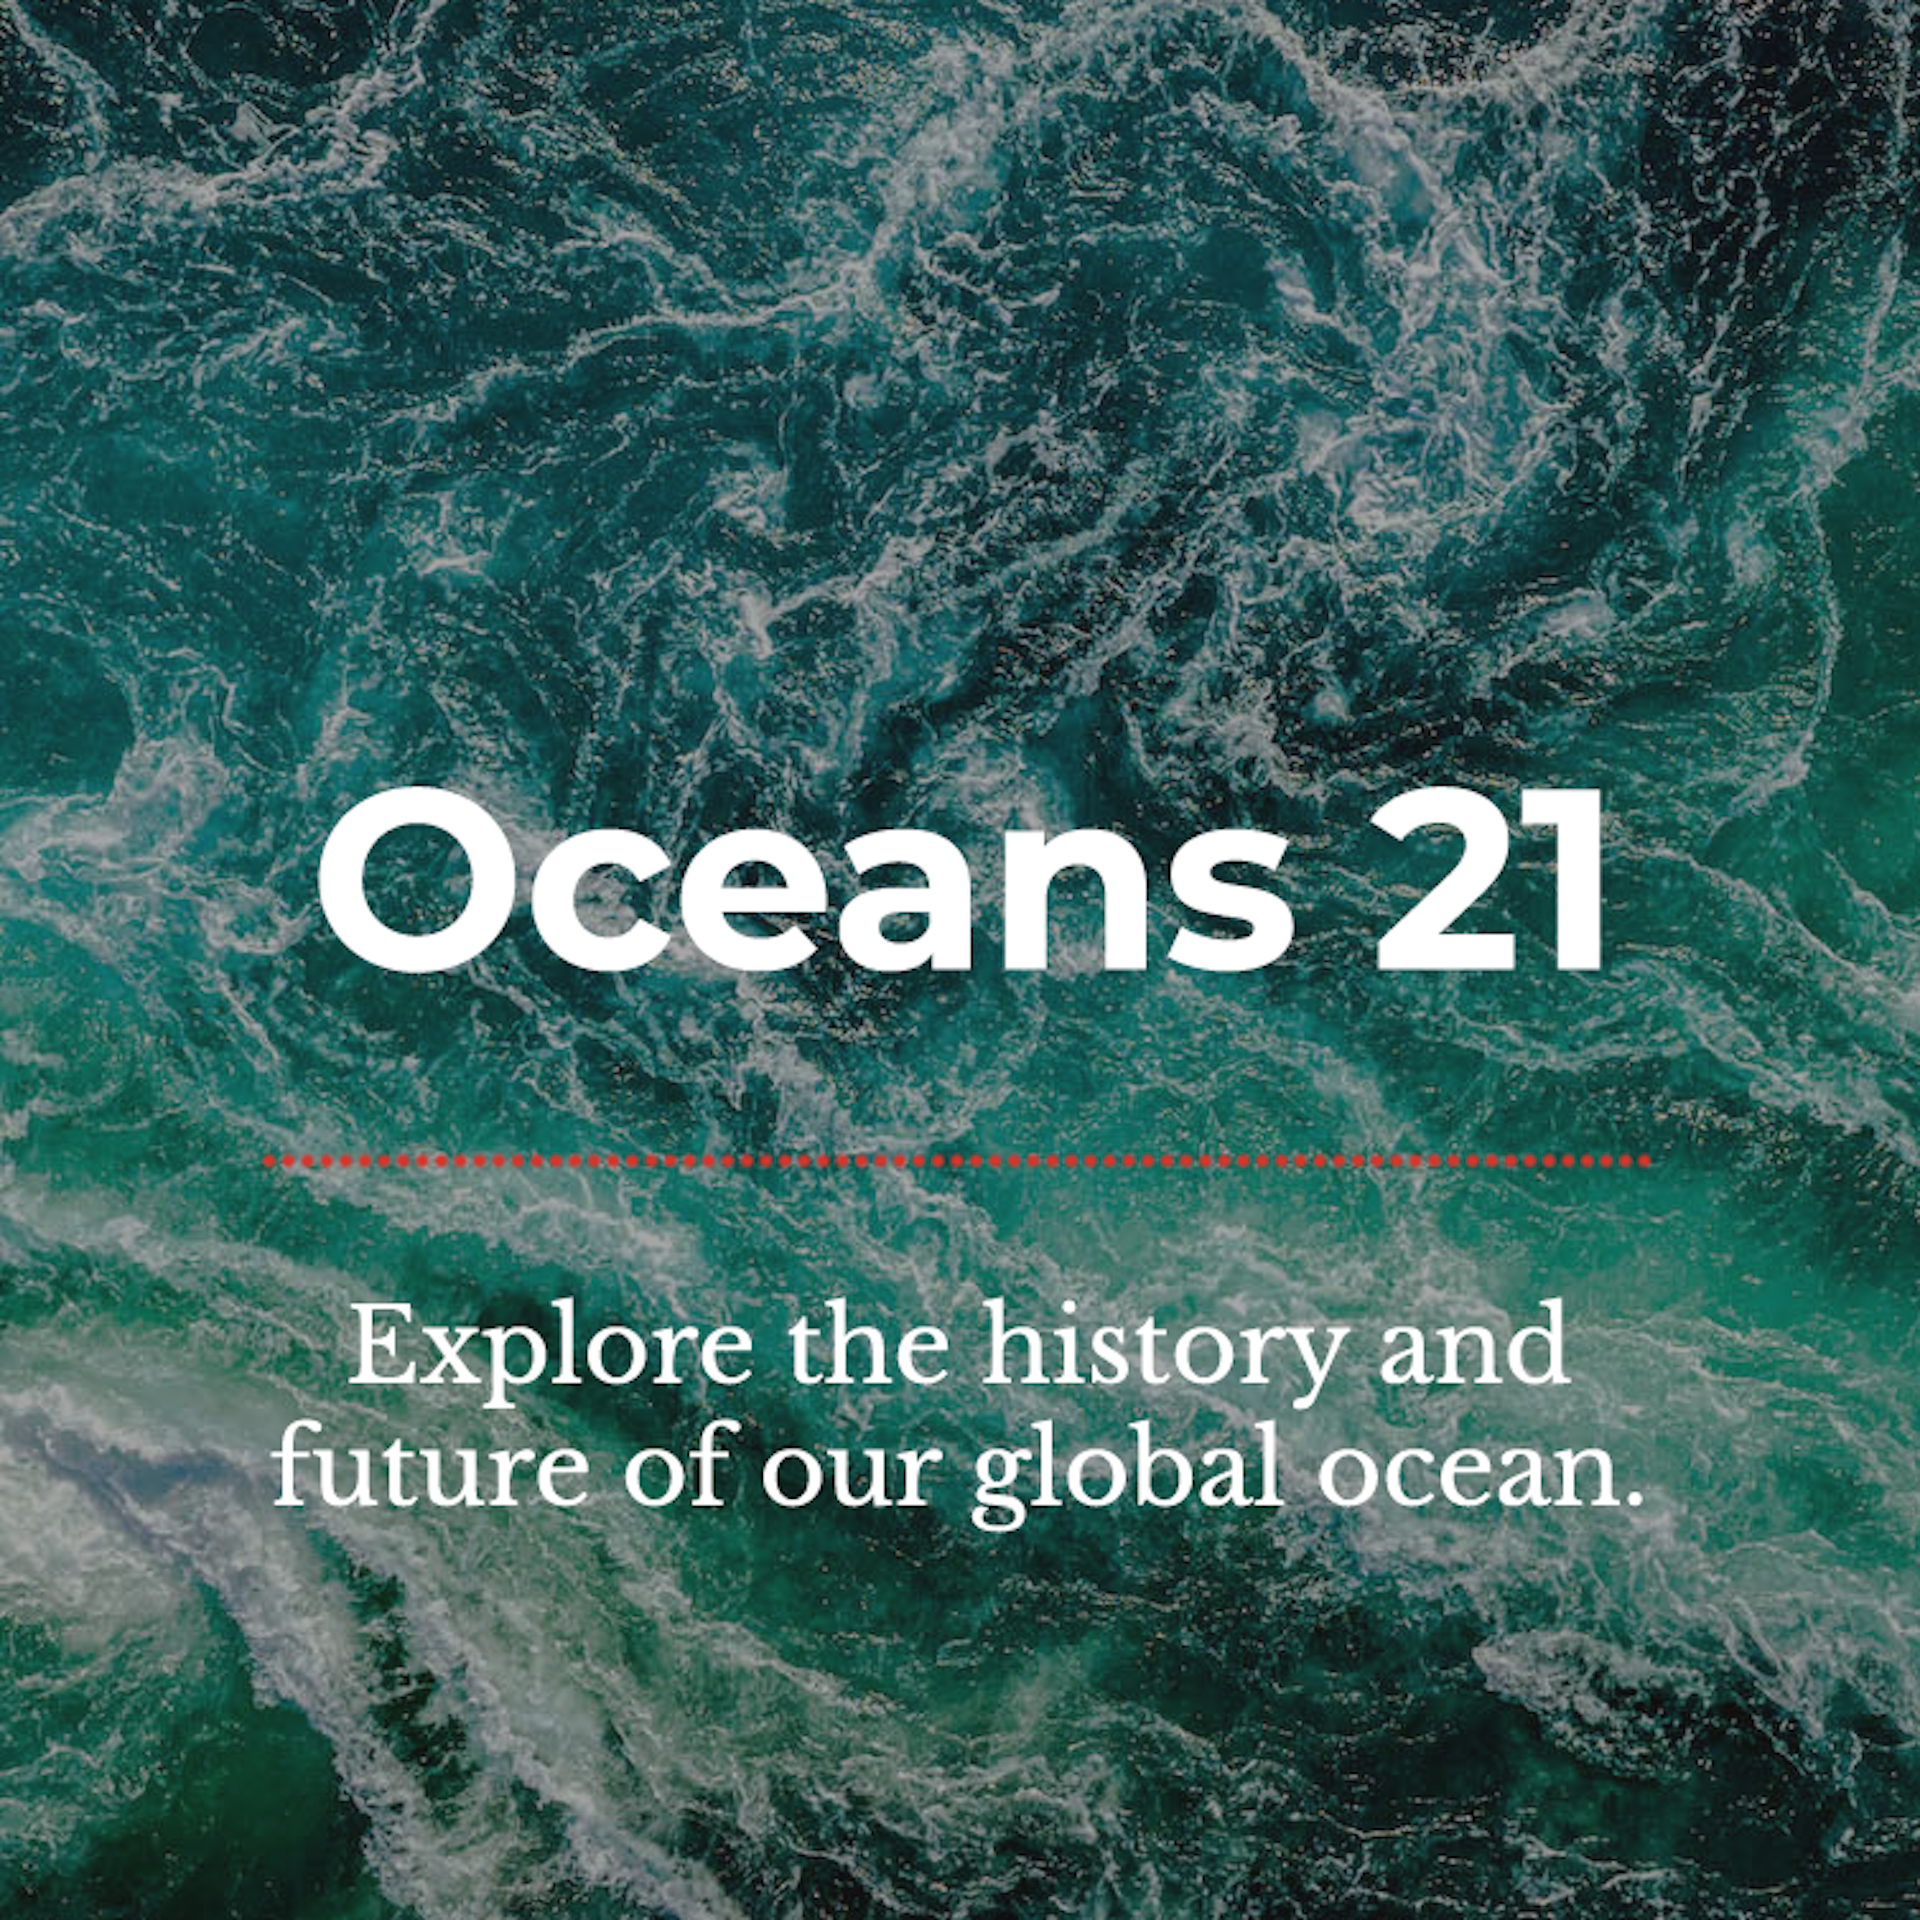 The world's ocean is bearing the brunt of a changing climate. Explore its past and future in our new series